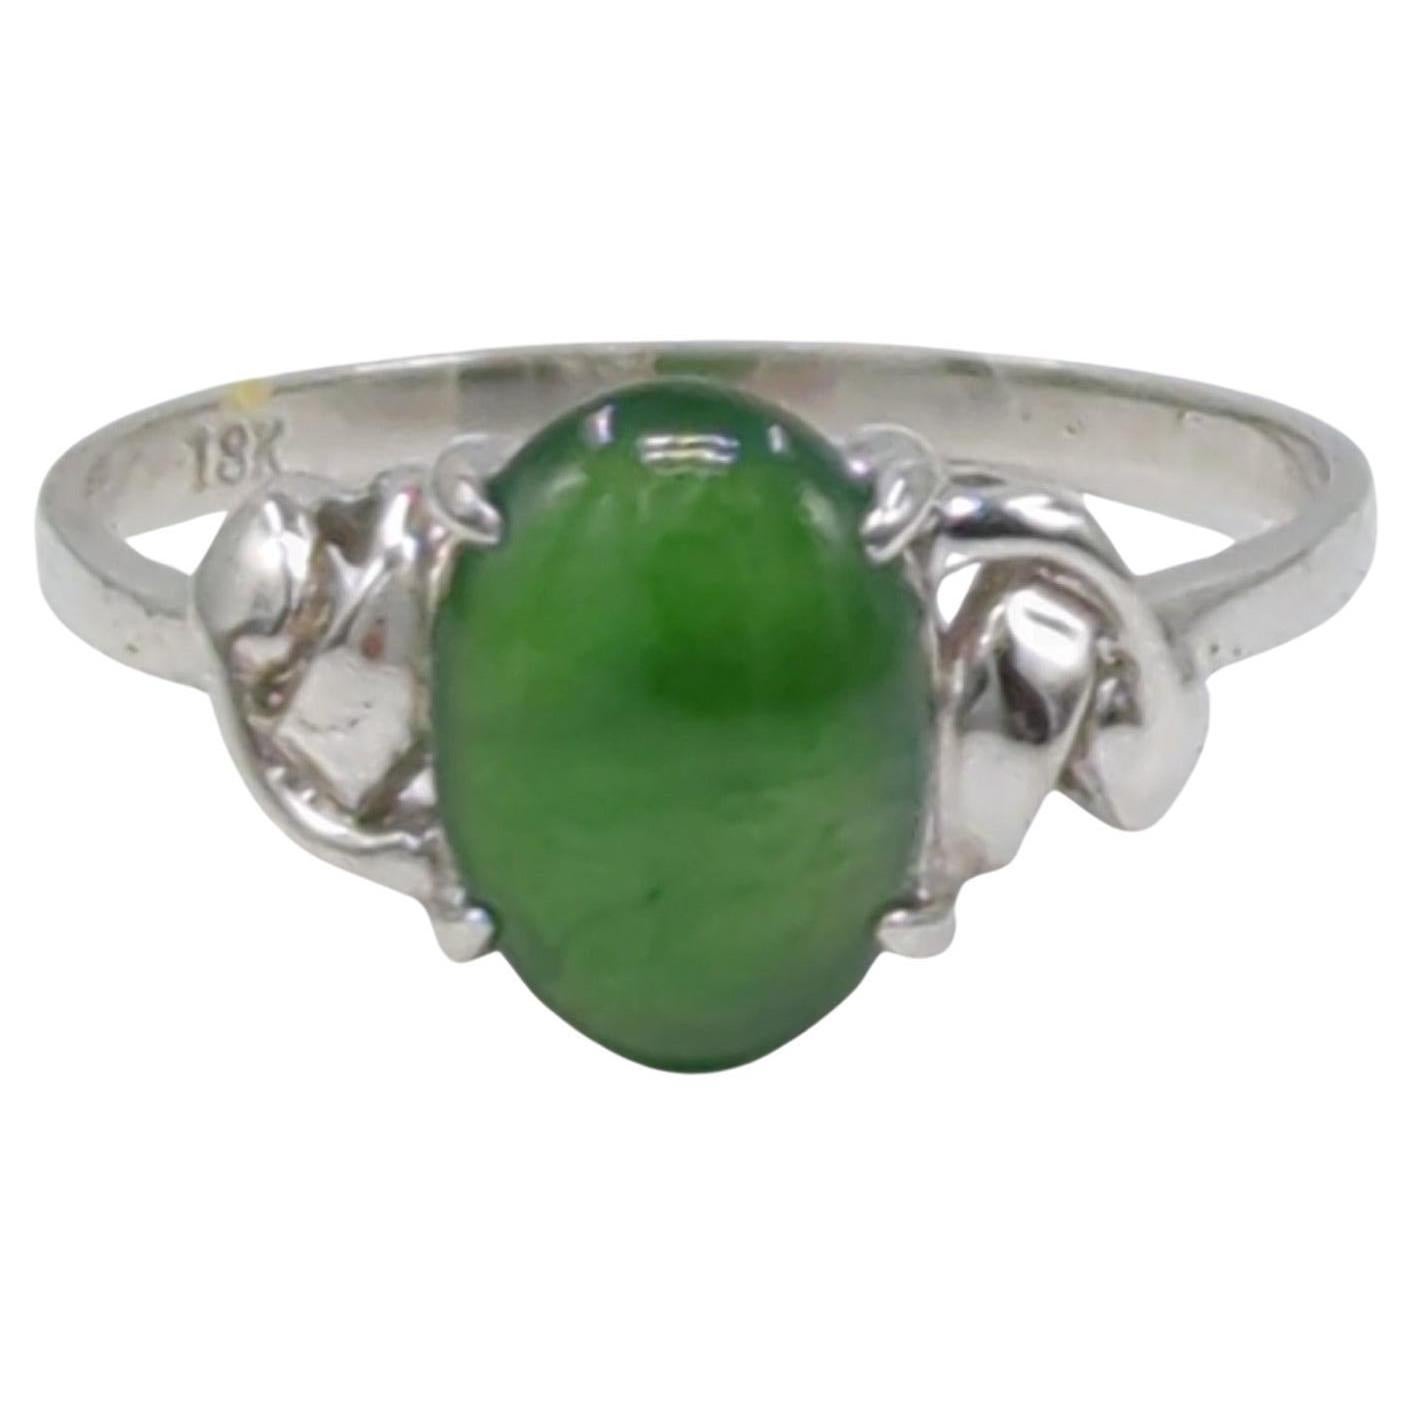 This simple yet elegant ladies' ring is crafted in 18K white gold and weighing 1.5 grams. At the center of its design lies a captivating oval cabochon deep green A grade jadeite, The jadeite is translucent and exhibits a high-quality polish, making